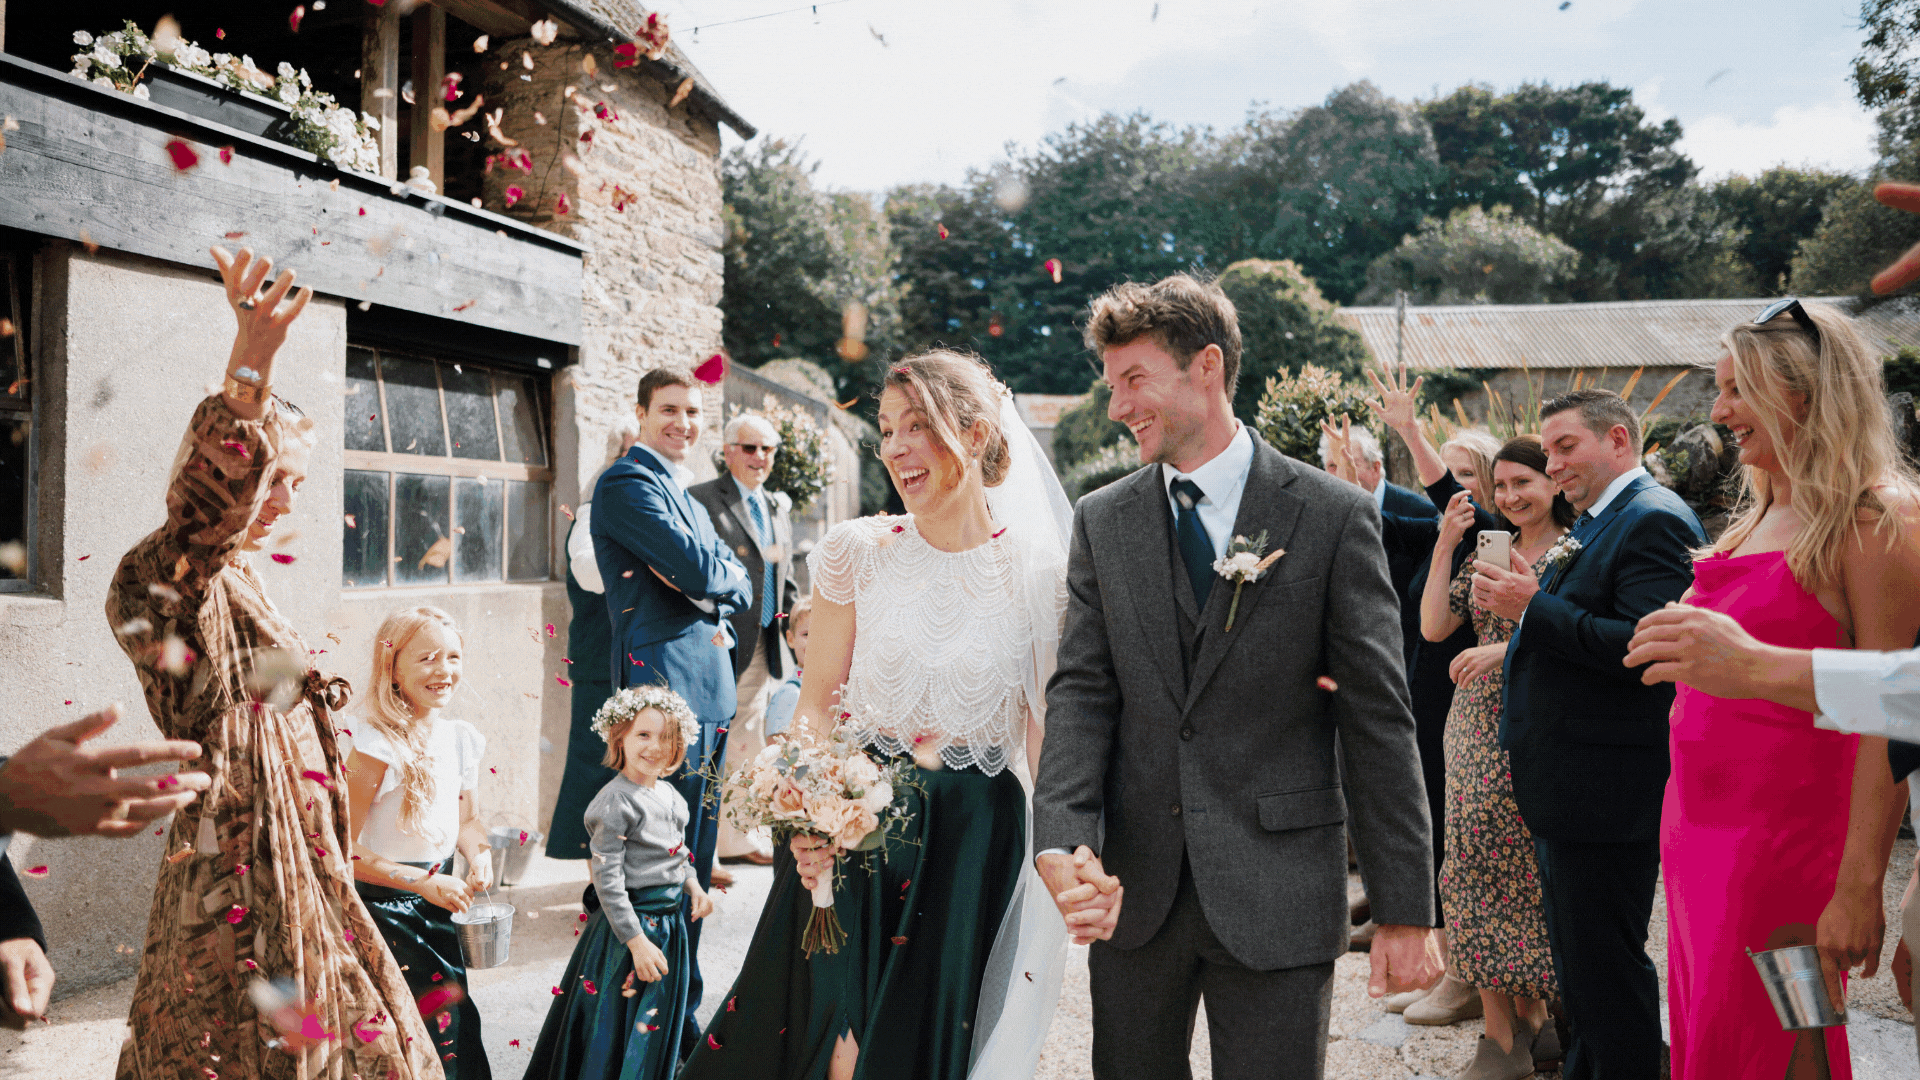 A selection of favourite images taken at a coastal wedding by Devon Wedding Photographer Liberty Pearl